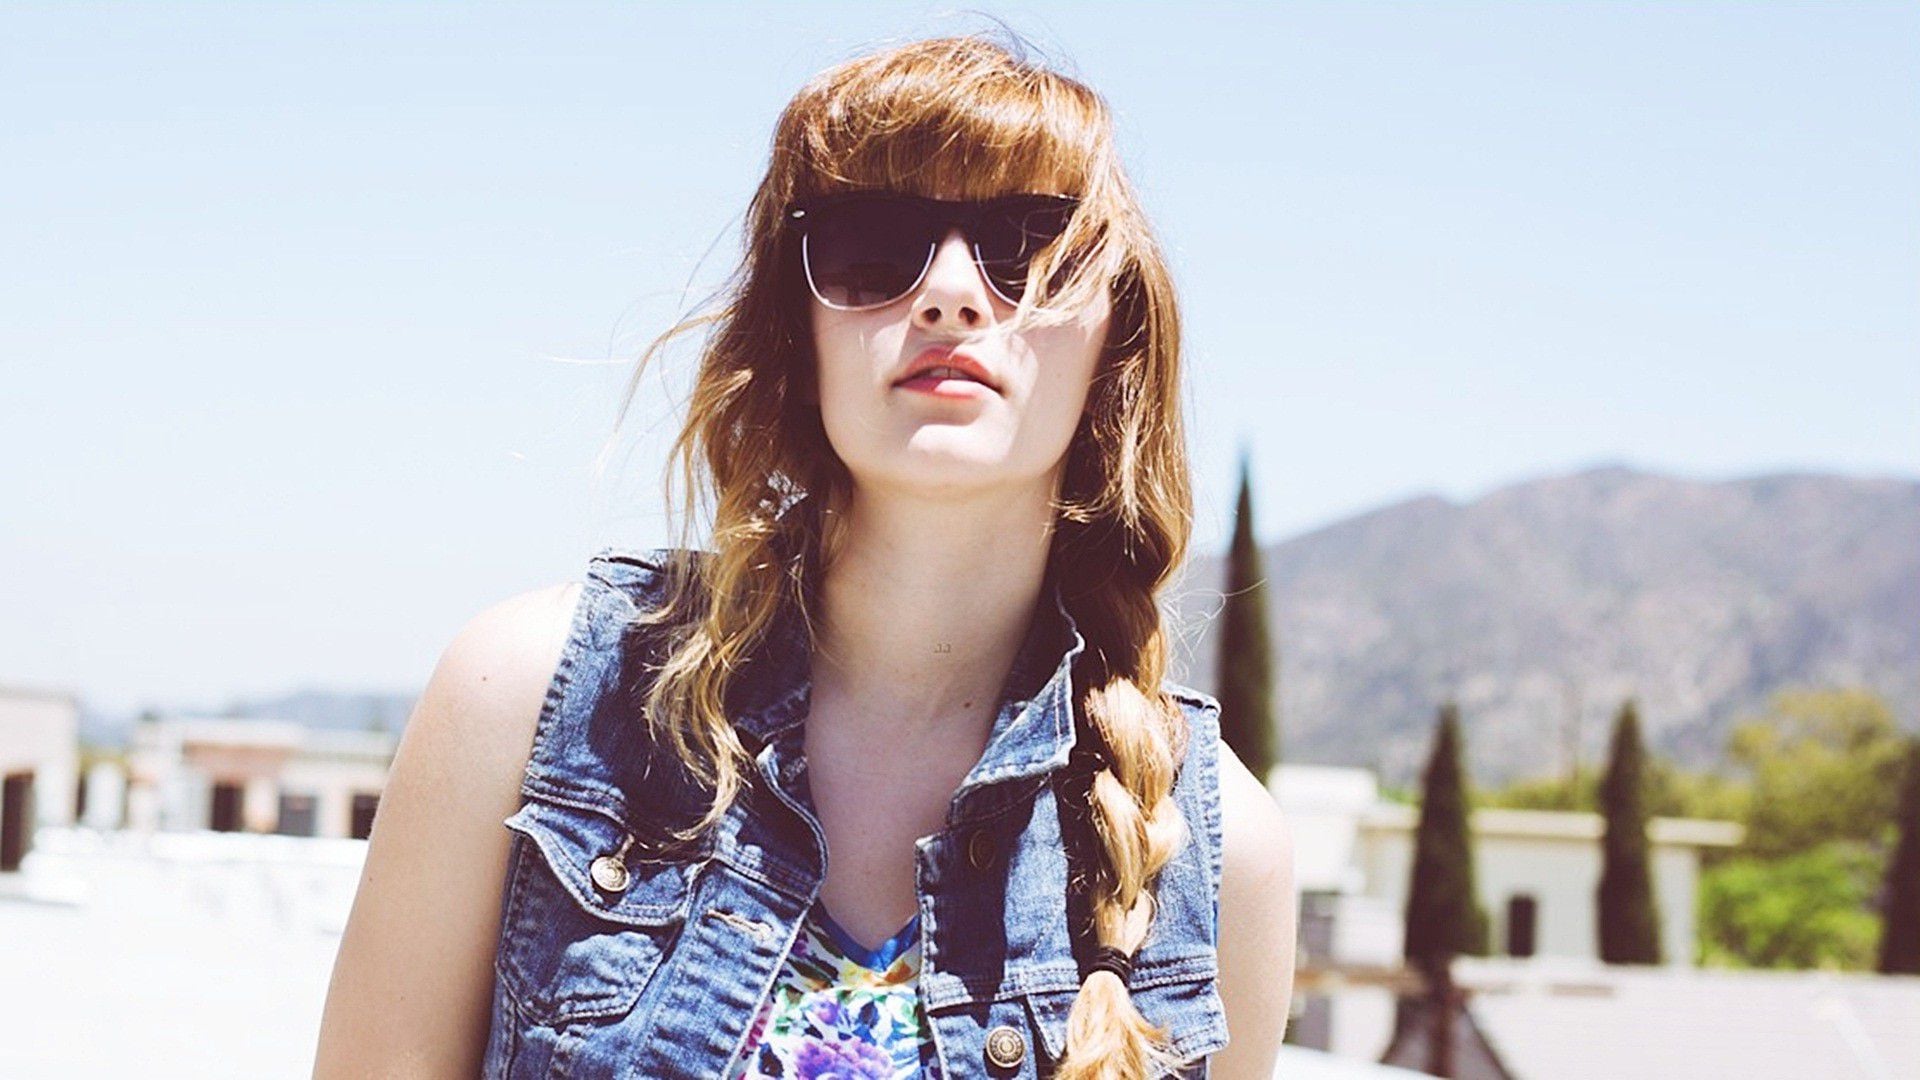 aubrey peeples holiday pictures